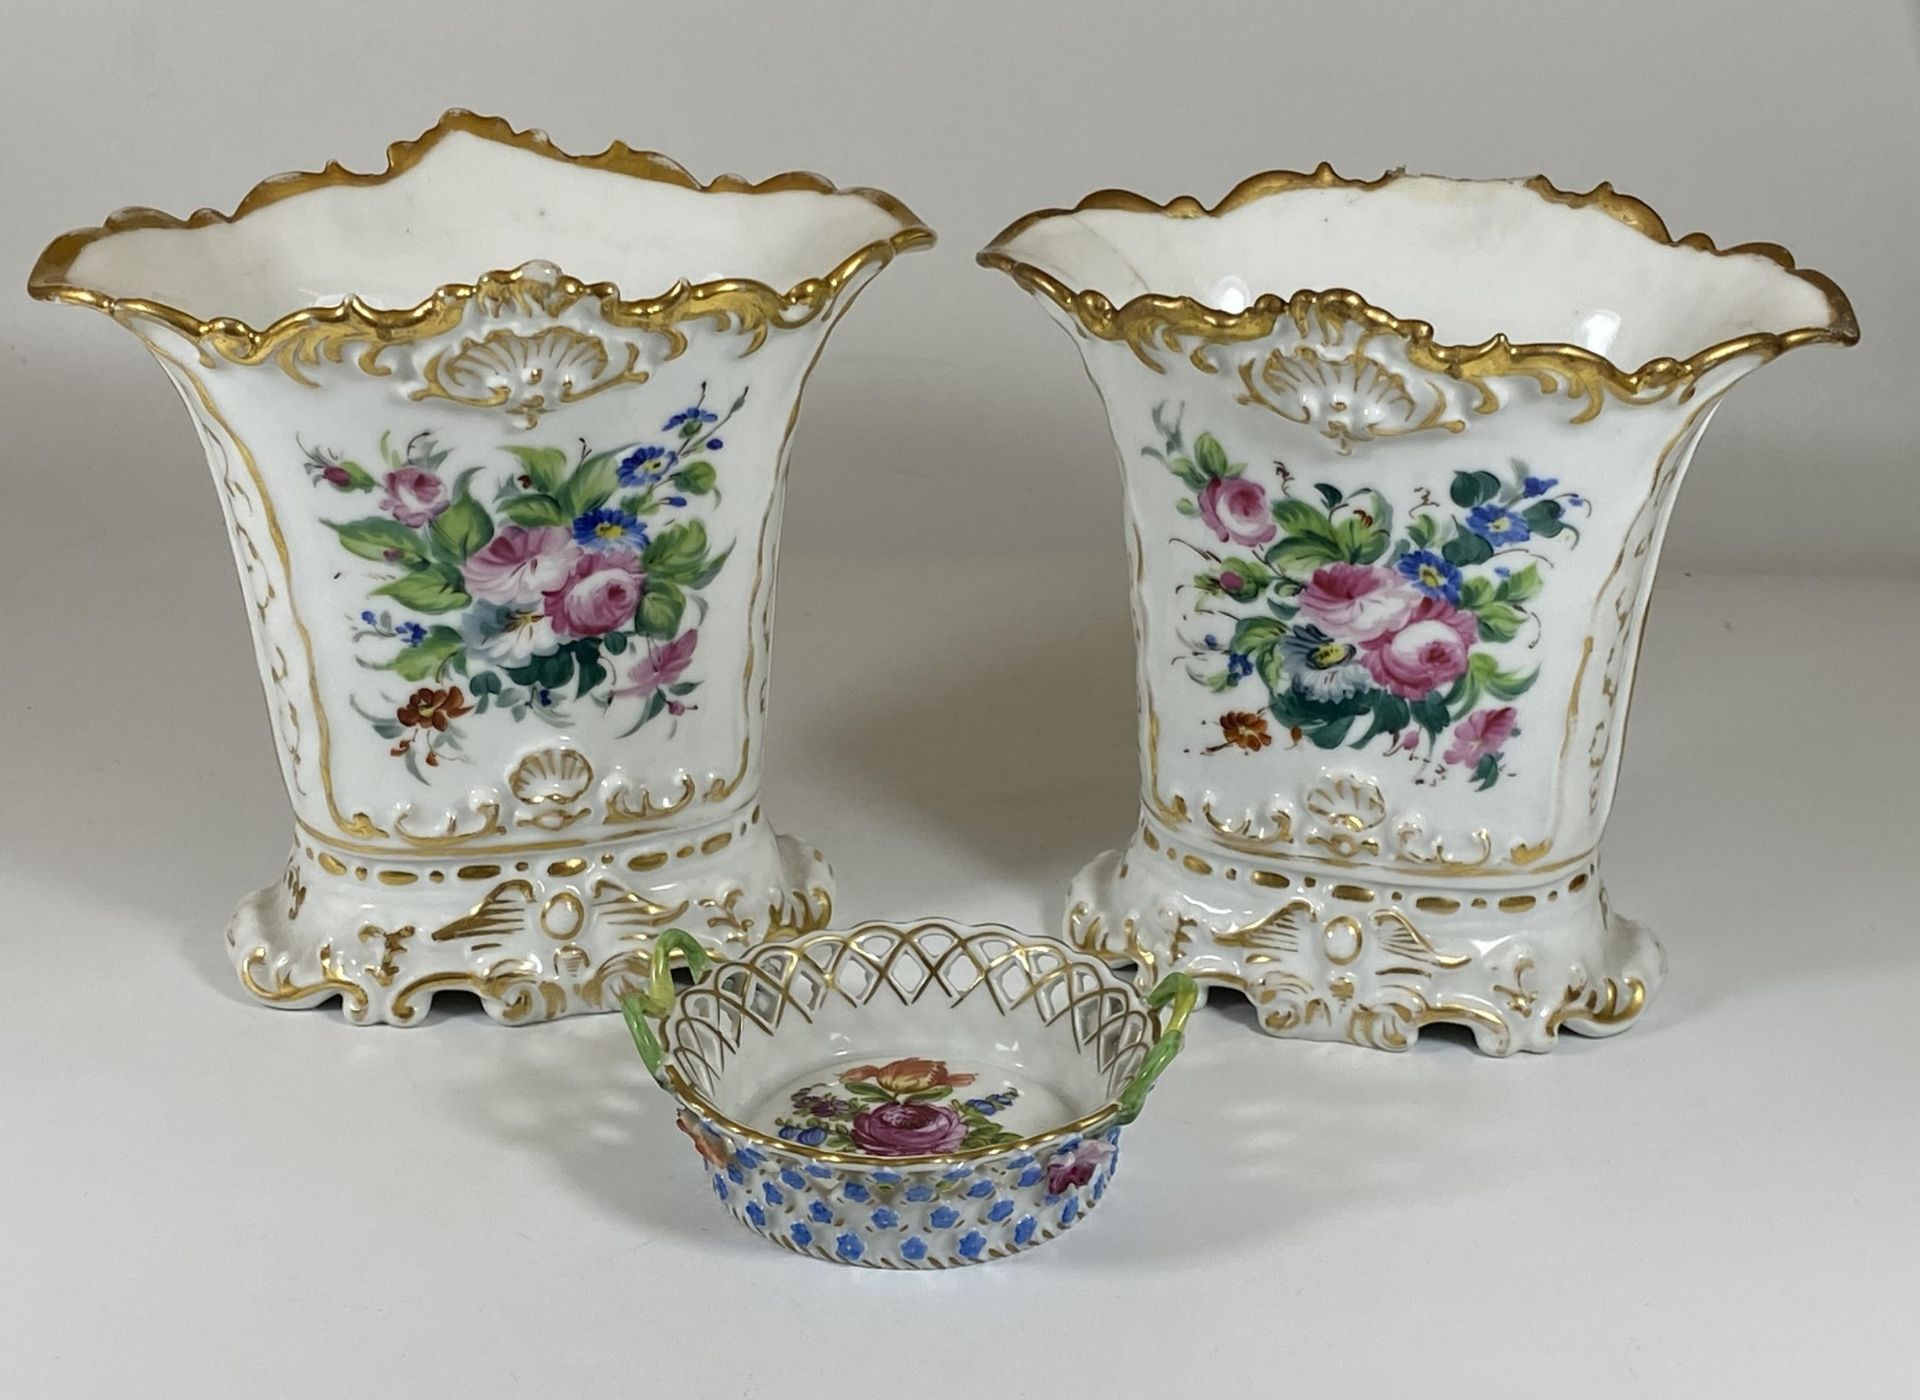 A PAIR OF CONTINENTAL HAND PAINTED PORCELAIN VASES, HEIGHT 16CM, TOGETHER WITH A SIGNED DRESDEN